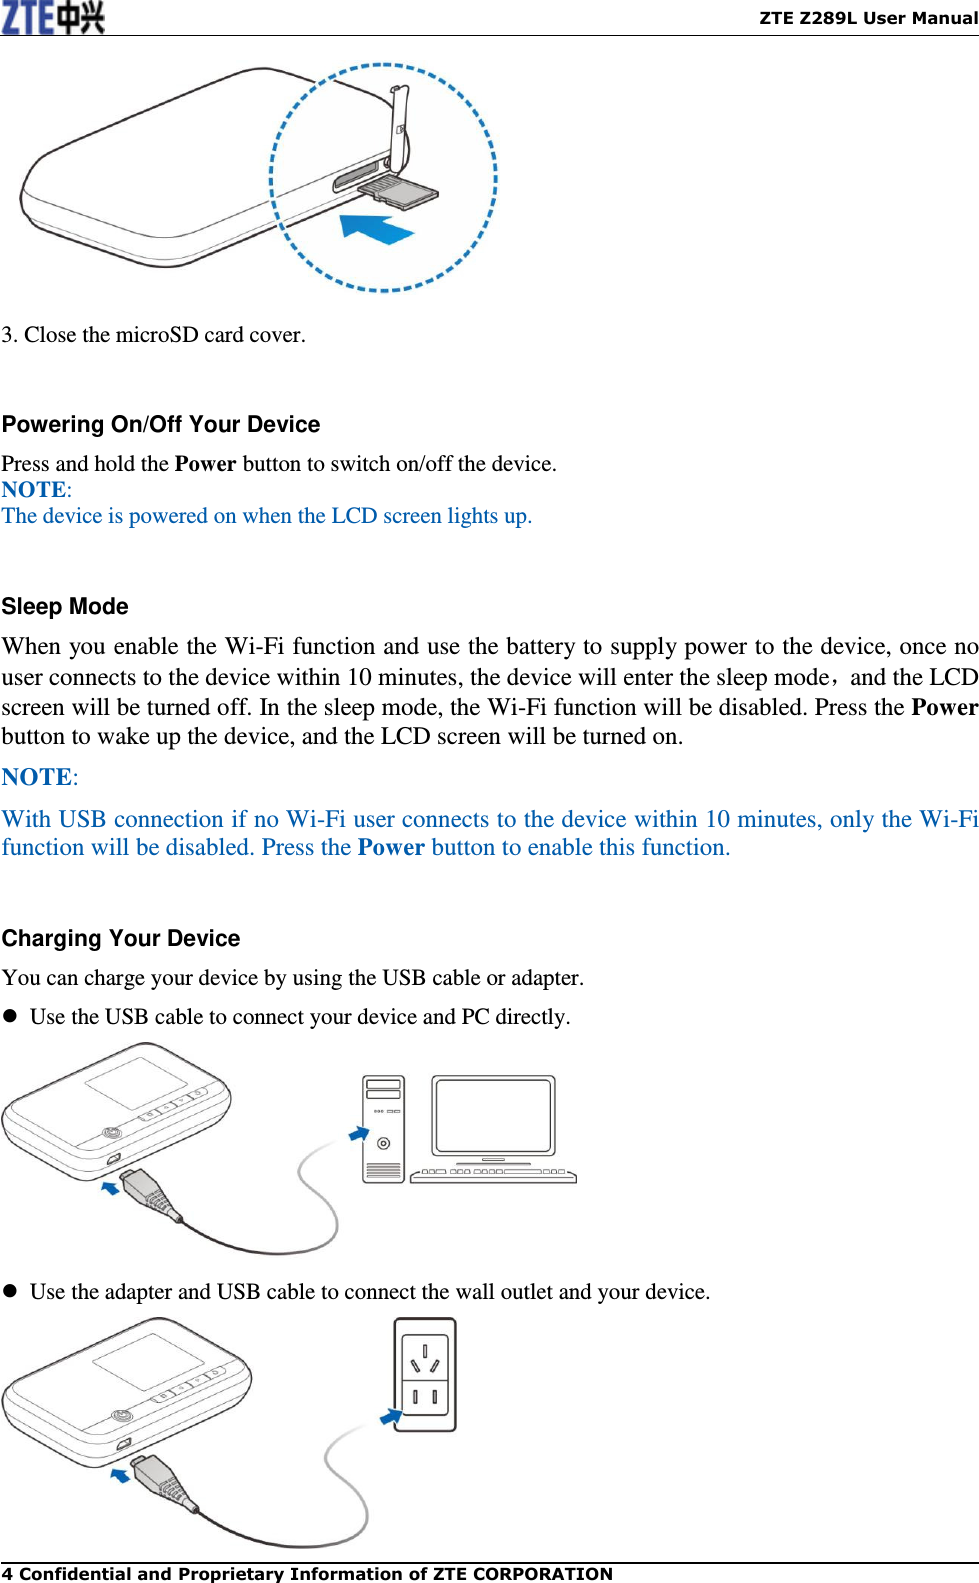    ZTE Z289L User Manual 4 Confidential and Proprietary Information of ZTE CORPORATION   3. Close the microSD card cover.  Powering On/Off Your Device Press and hold the Power button to switch on/off the device. NOTE:   The device is powered on when the LCD screen lights up.    Sleep Mode When you enable the Wi-Fi function and use the battery to supply power to the device, once no user connects to the device within 10 minutes, the device will enter the sleep mode，and the LCD screen will be turned off. In the sleep mode, the Wi-Fi function will be disabled. Press the Power button to wake up the device, and the LCD screen will be turned on.   NOTE:   With USB connection if no Wi-Fi user connects to the device within 10 minutes, only the Wi-Fi function will be disabled. Press the Power button to enable this function.  Charging Your Device You can charge your device by using the USB cable or adapter.   Use the USB cable to connect your device and PC directly.    Use the adapter and USB cable to connect the wall outlet and your device.  